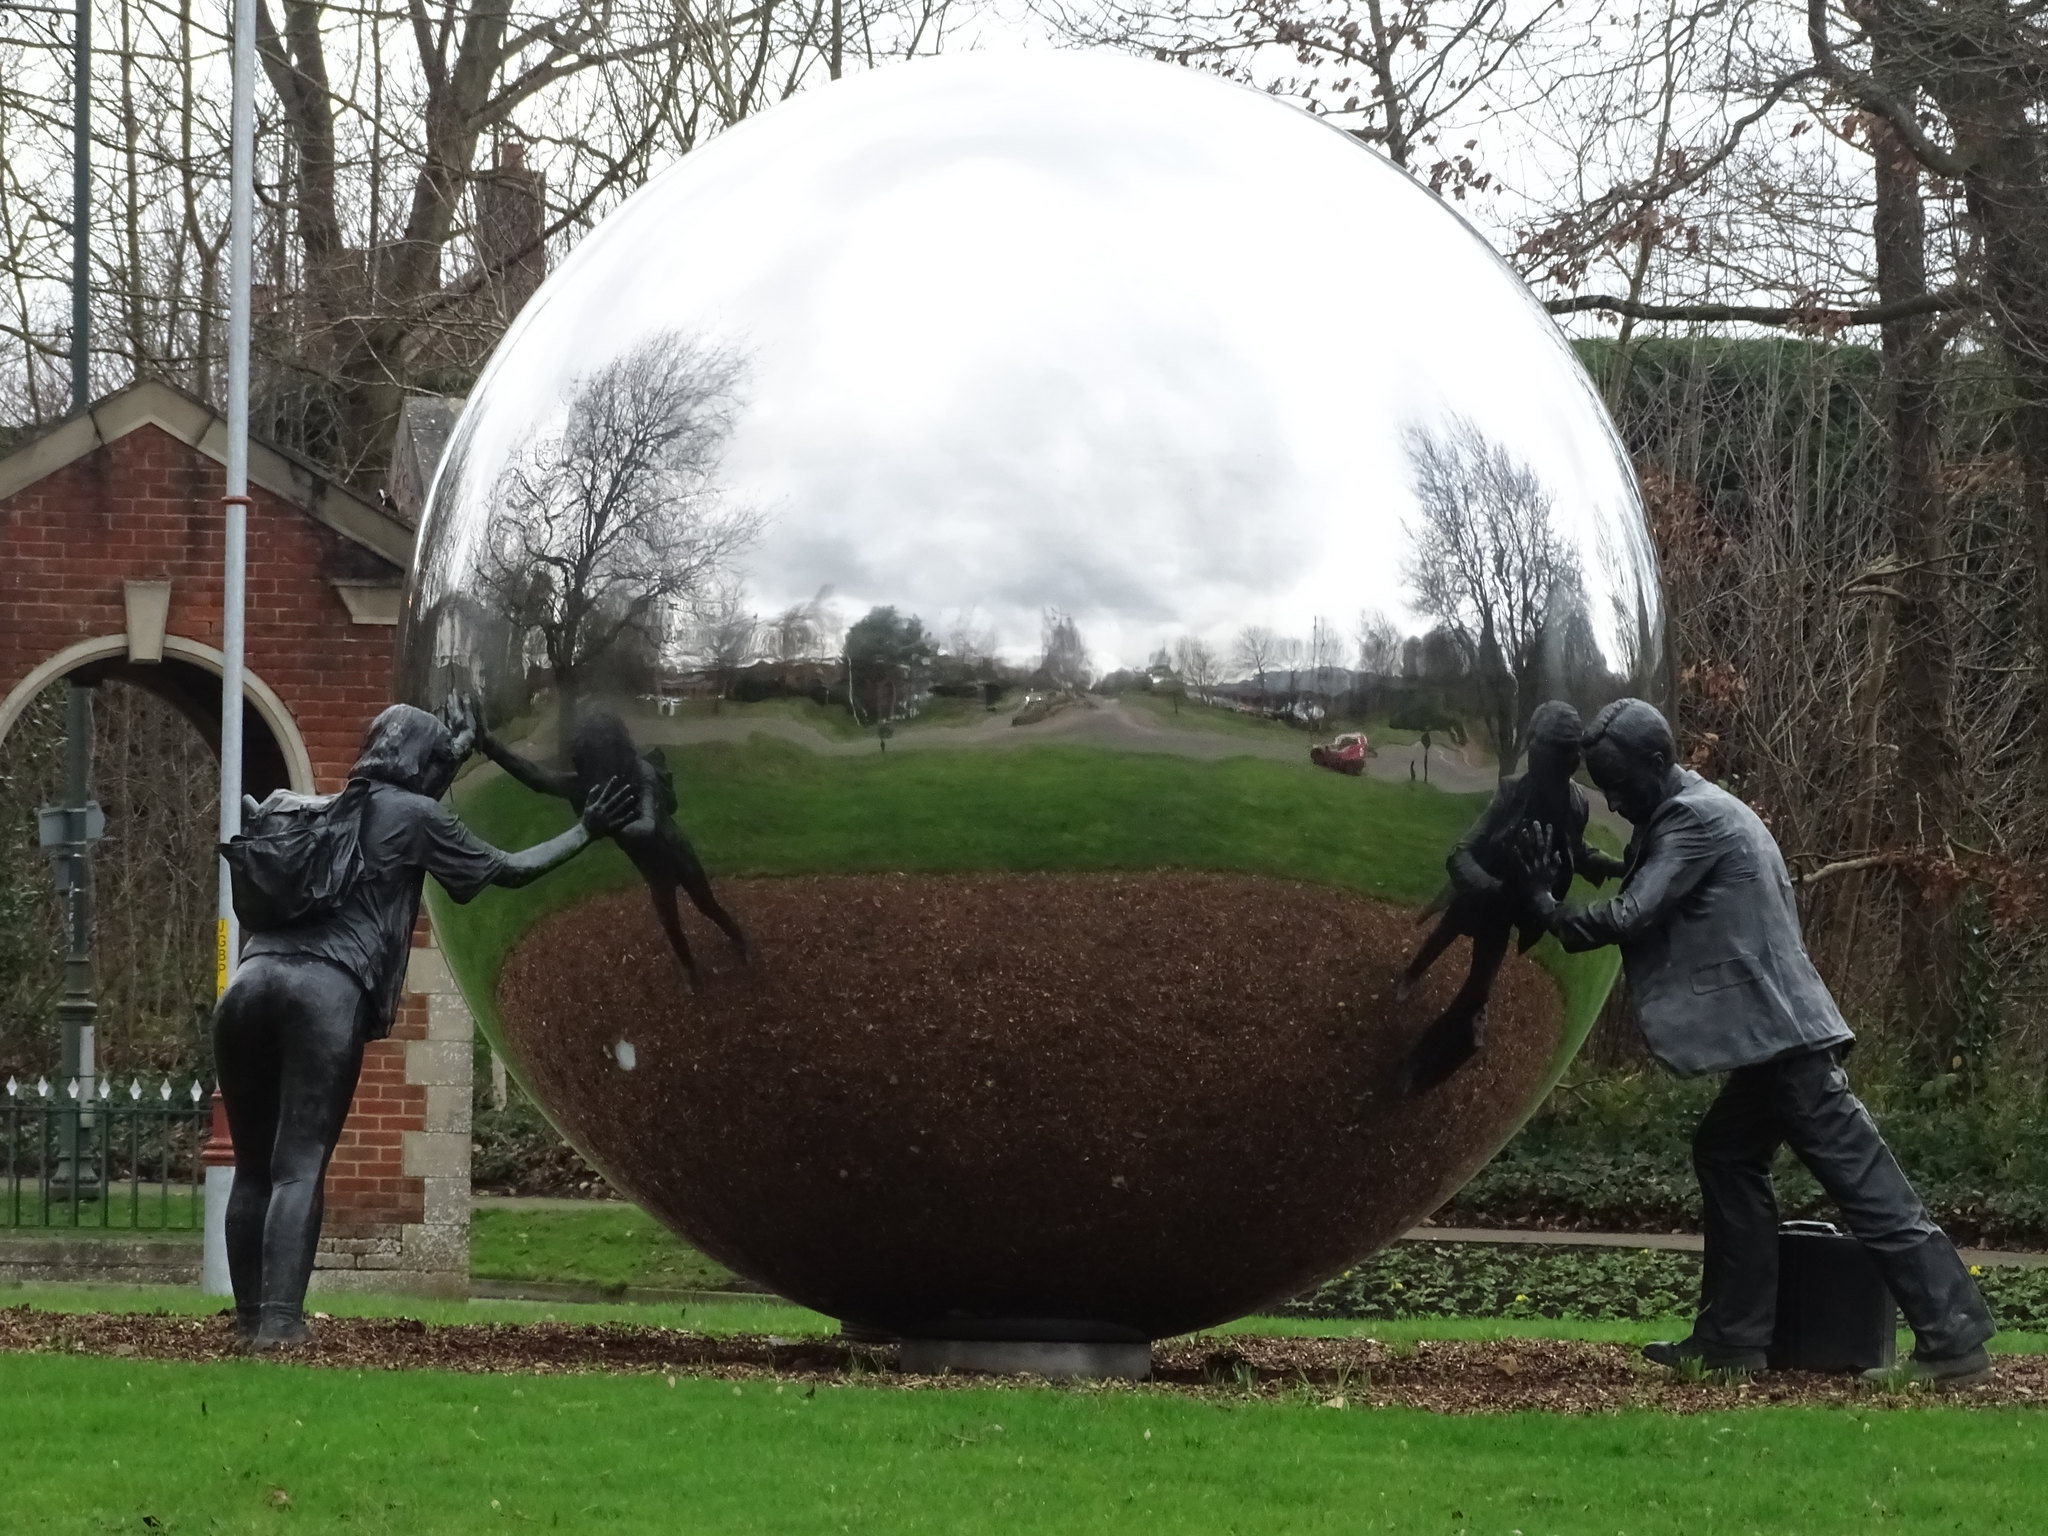 sculpture of two human figures (male and female) pushing on a shiny reflective metal sphere